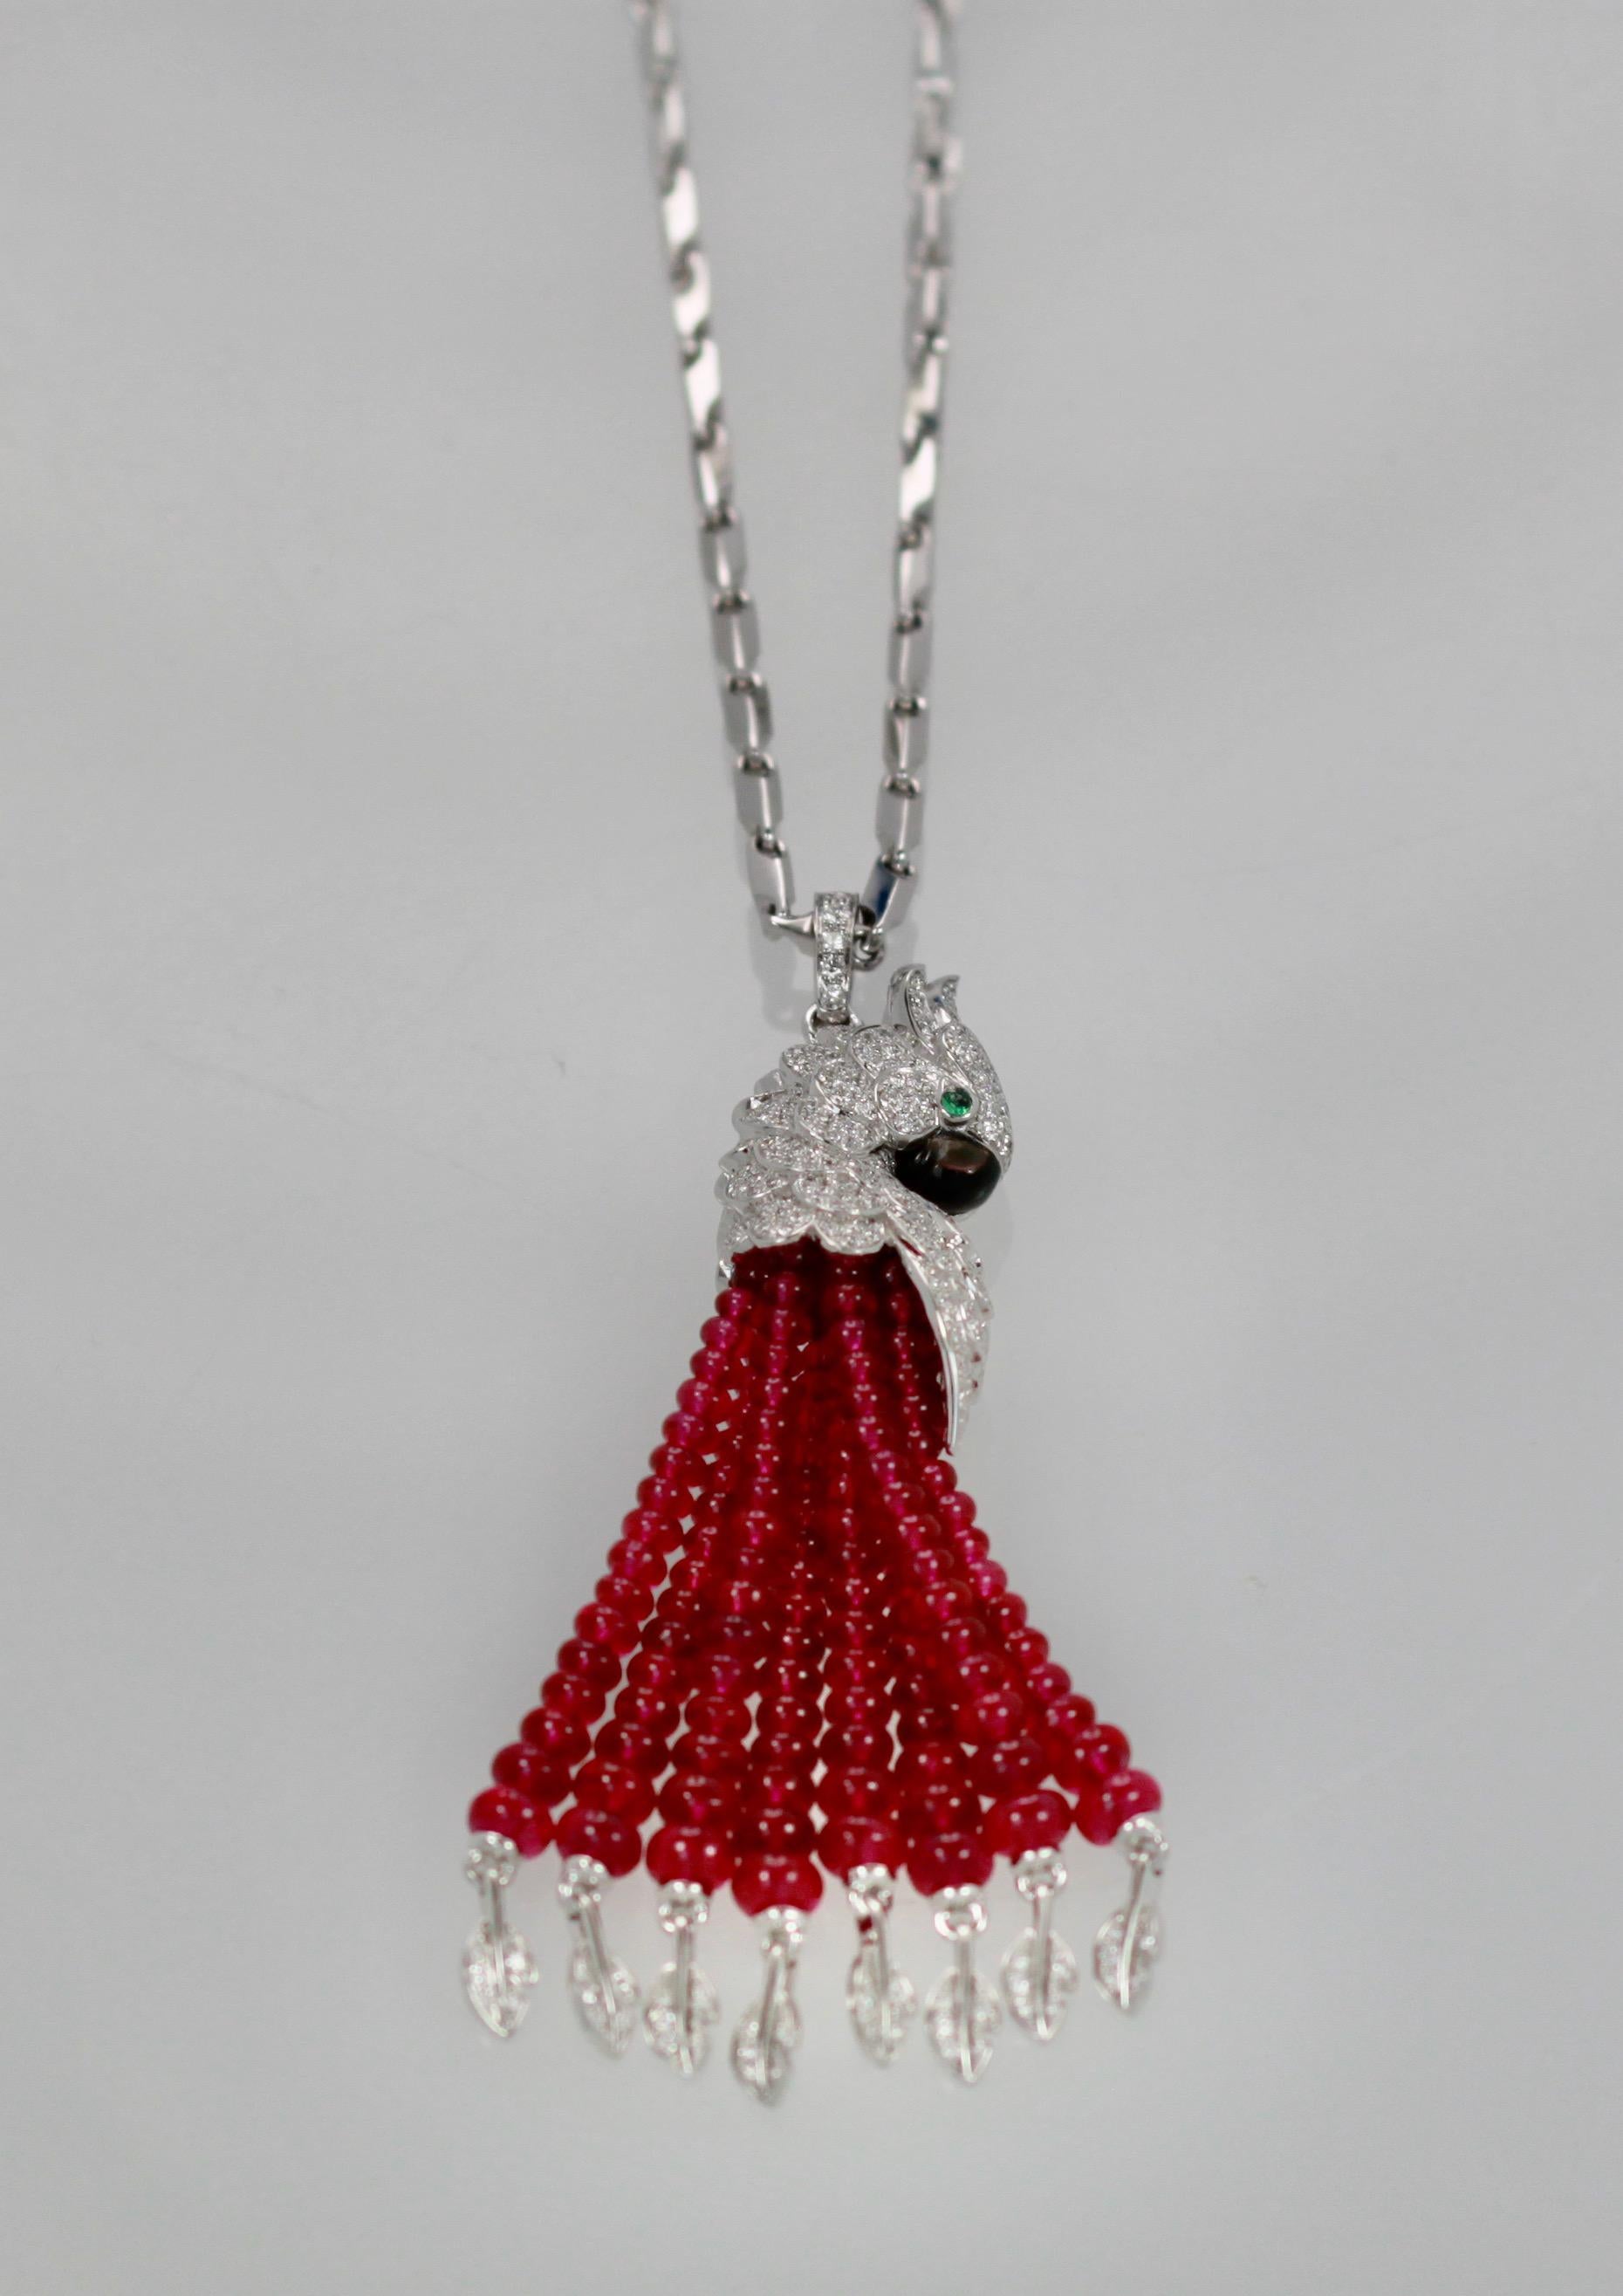 This gorgeous necklace retails for $258,000.  It is new never worn and outstanding.  This necklace has a chain encrusted with Diamonds and the tassels are leaf shaped and covered in Diamonds as well.  The main piece is a diamond head parrot with an